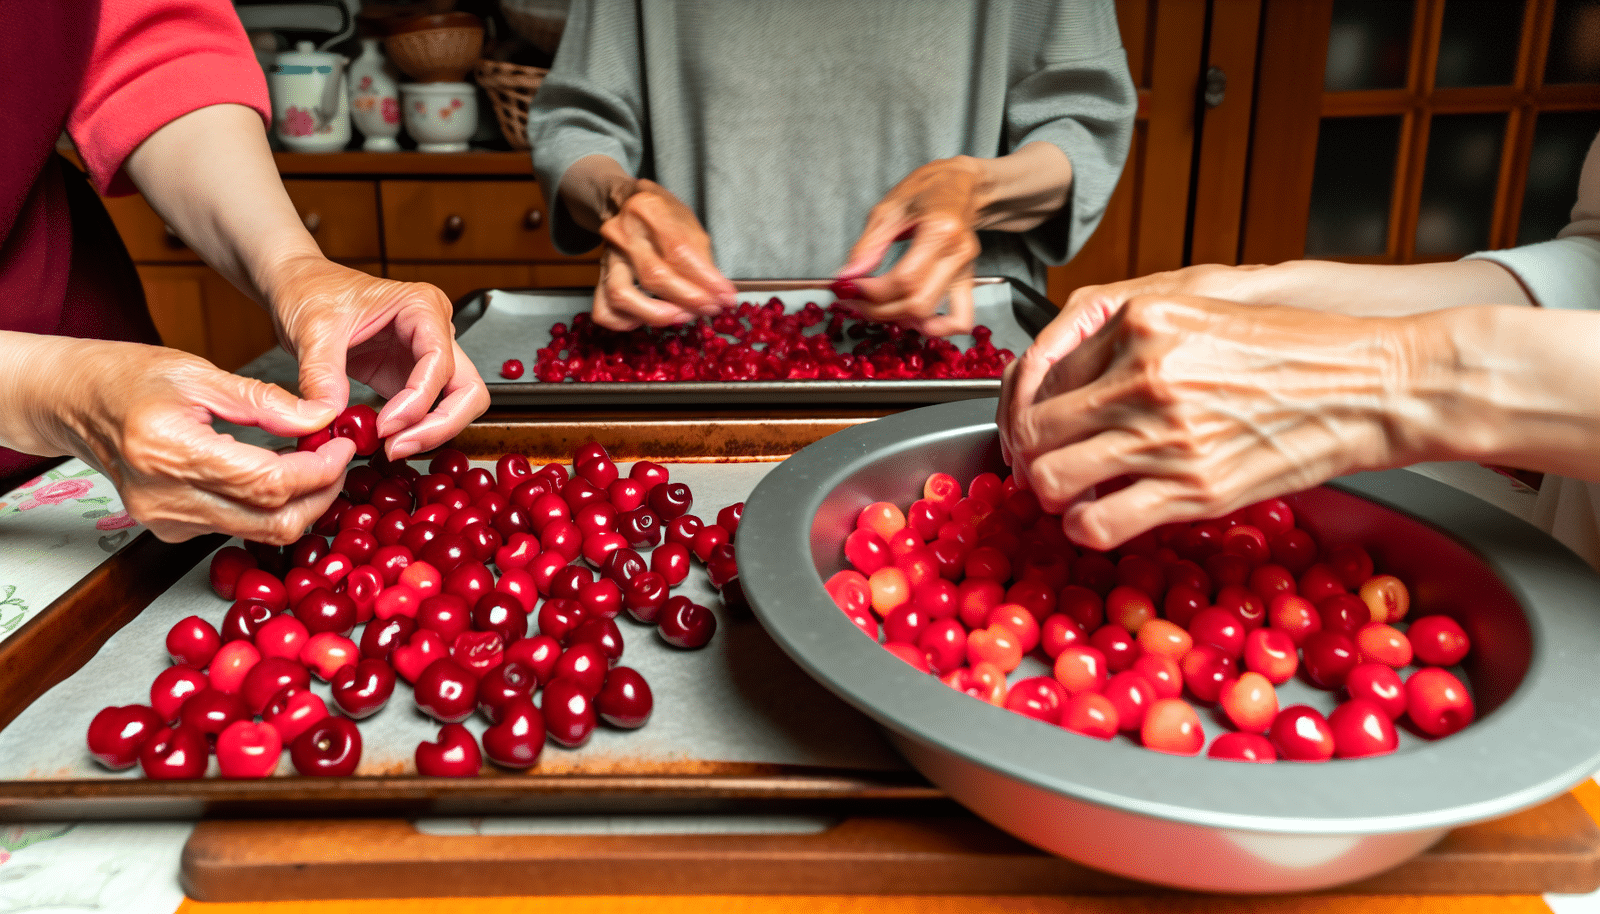 Cherries being pitted and cleaned on a baking sheet